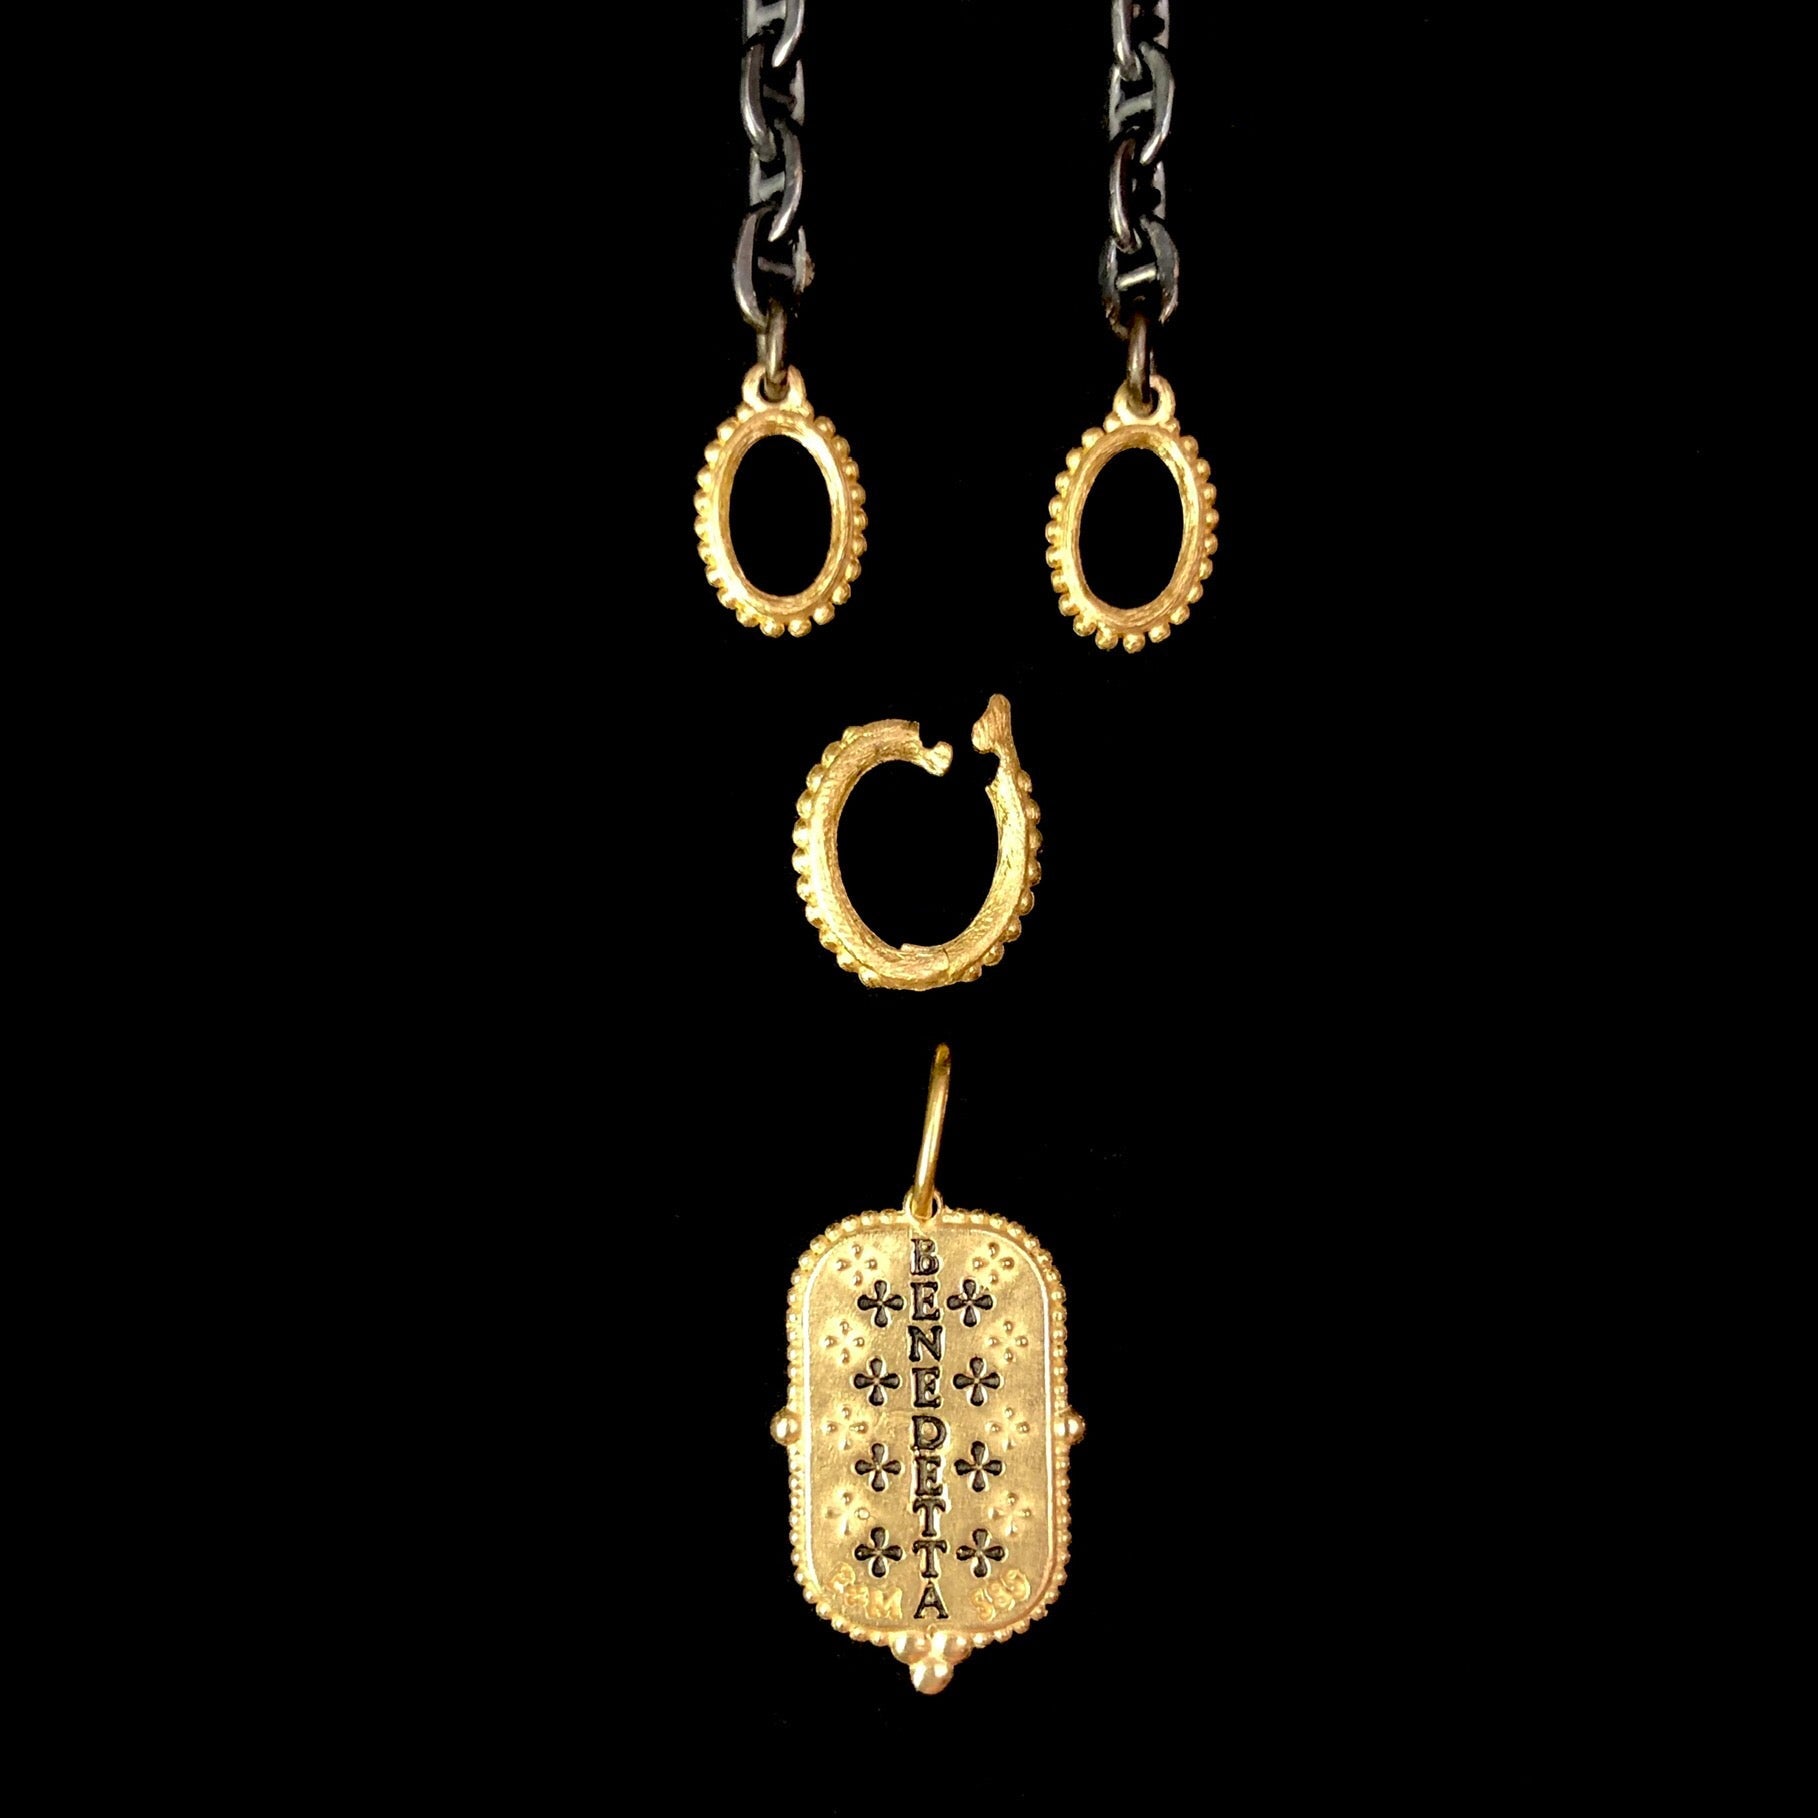 Gold Oval Charm Holder show with matching open-ended chain and charm as reference for intended use